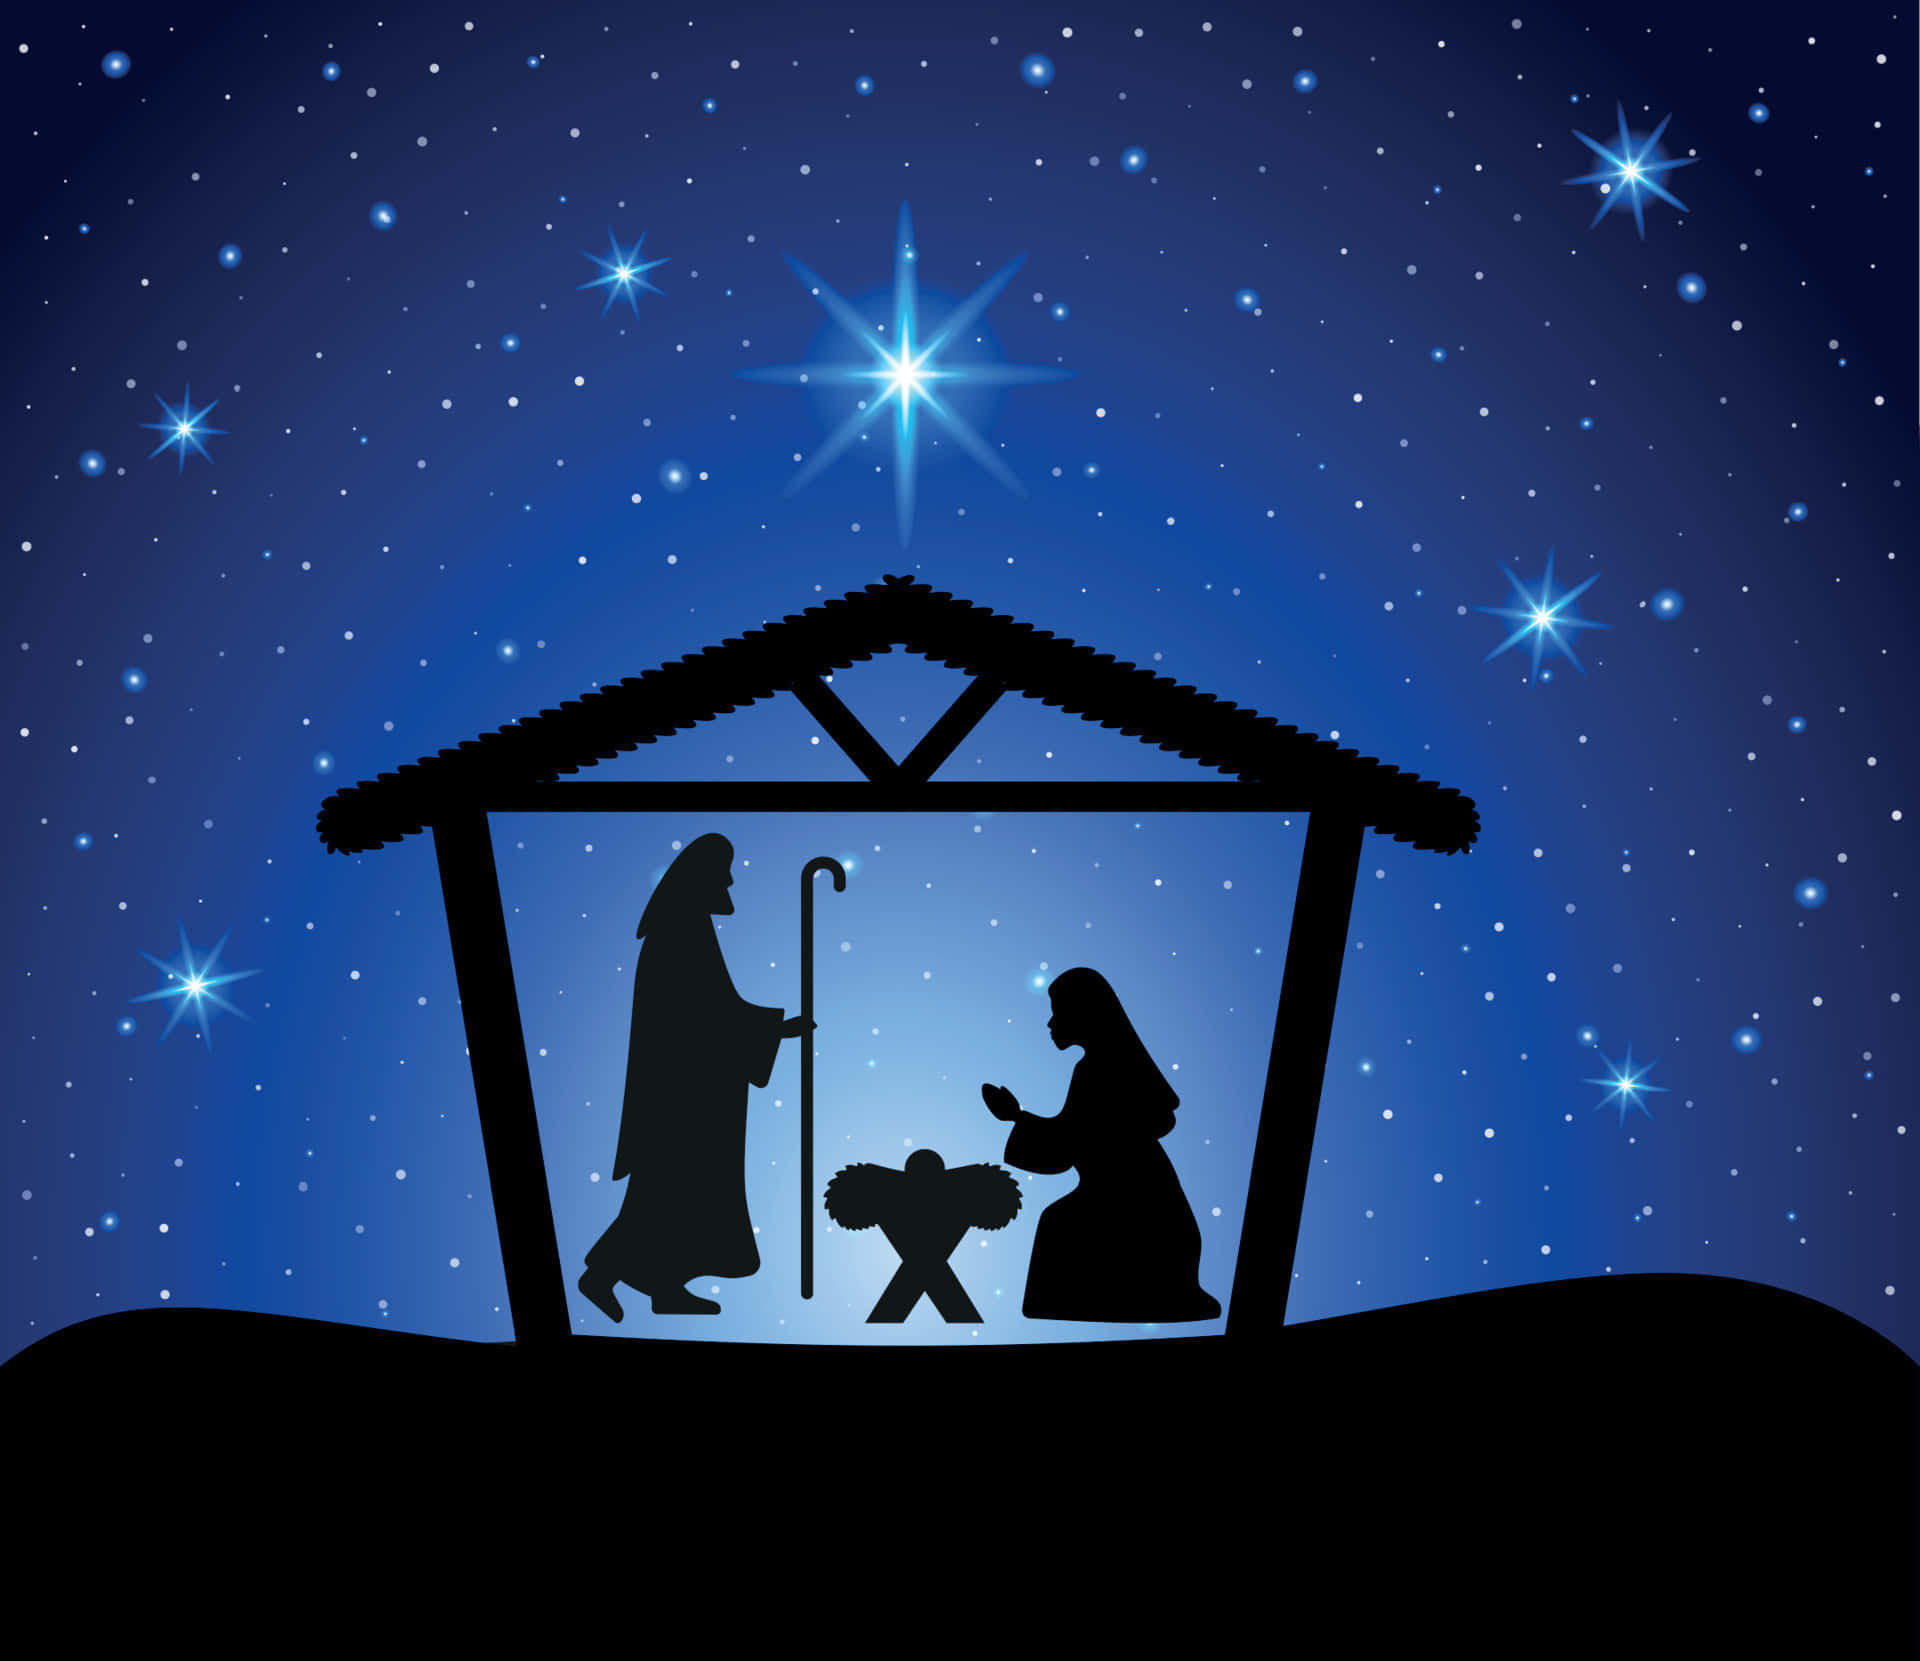 Celebrating the birth of Jesus on an Advent Evening